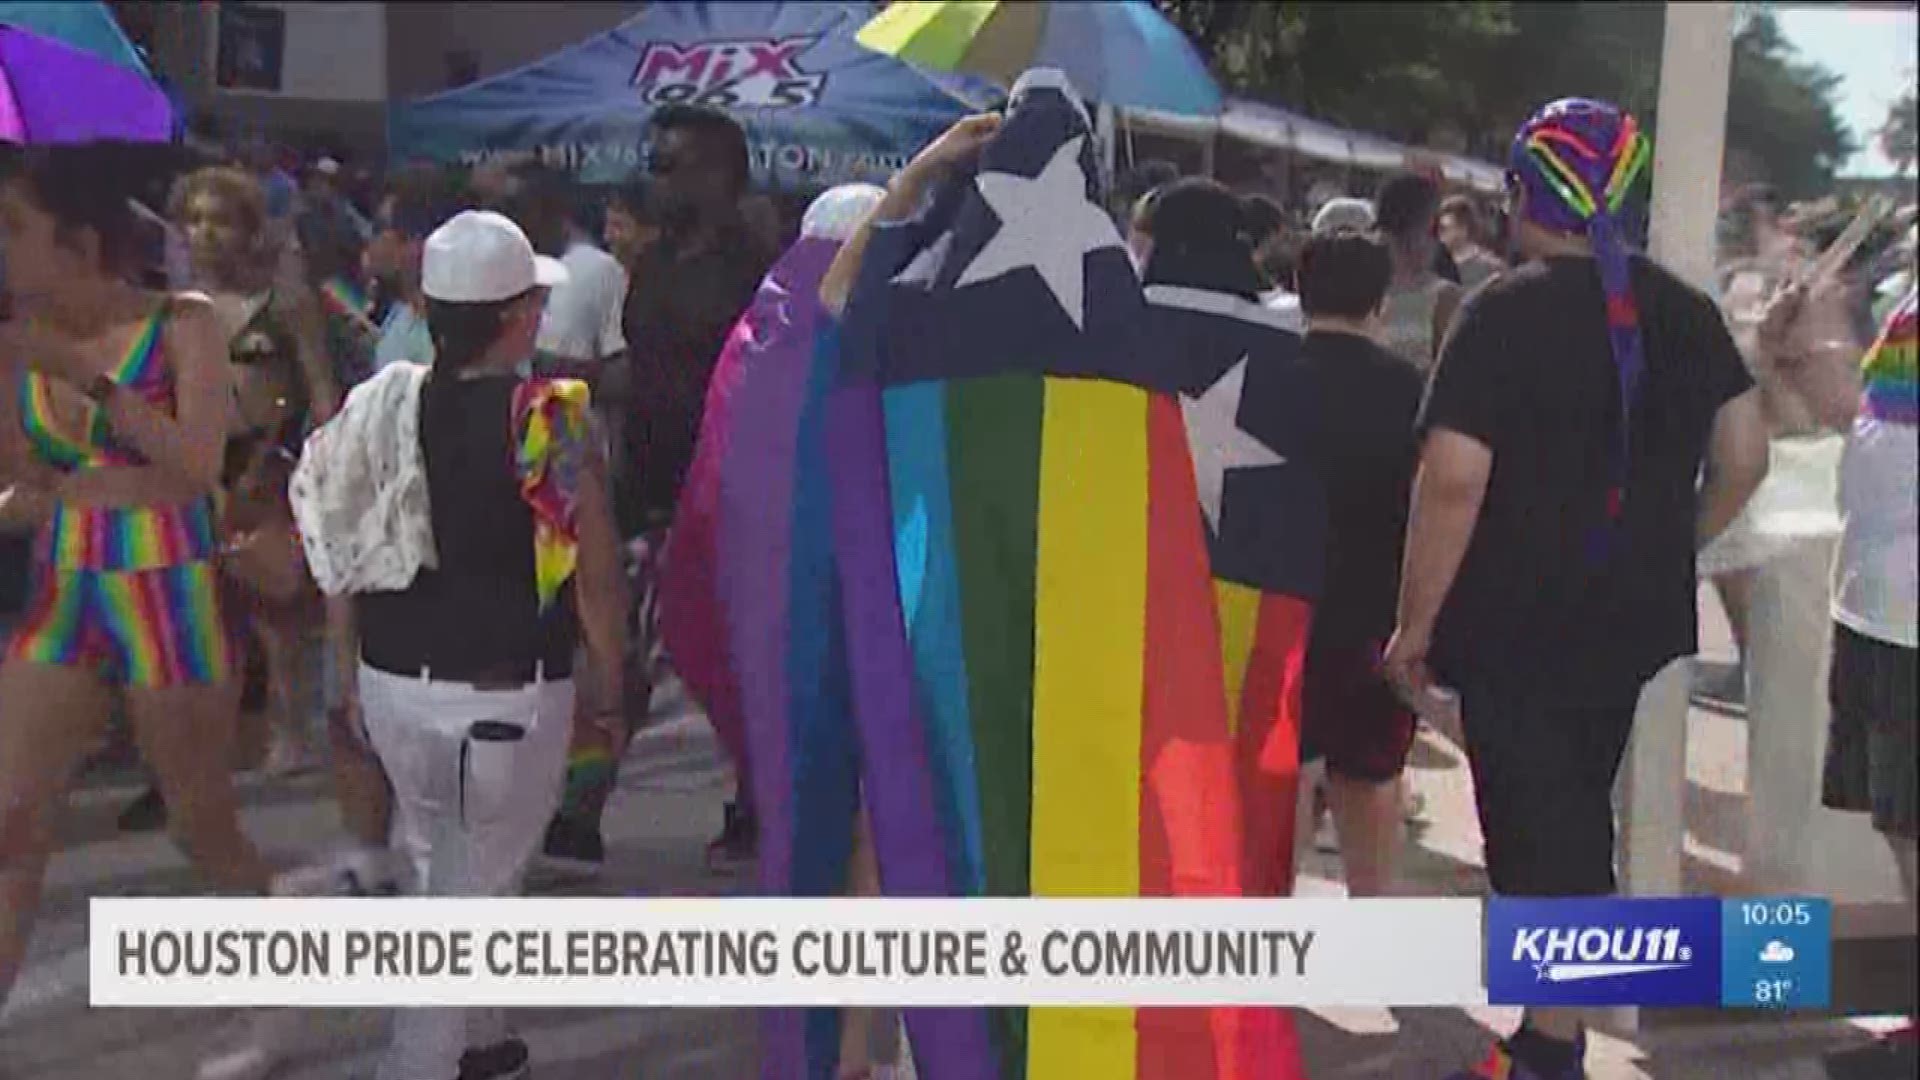 It was a huge party downtown for the 40th Annual Houston Pride Celebration